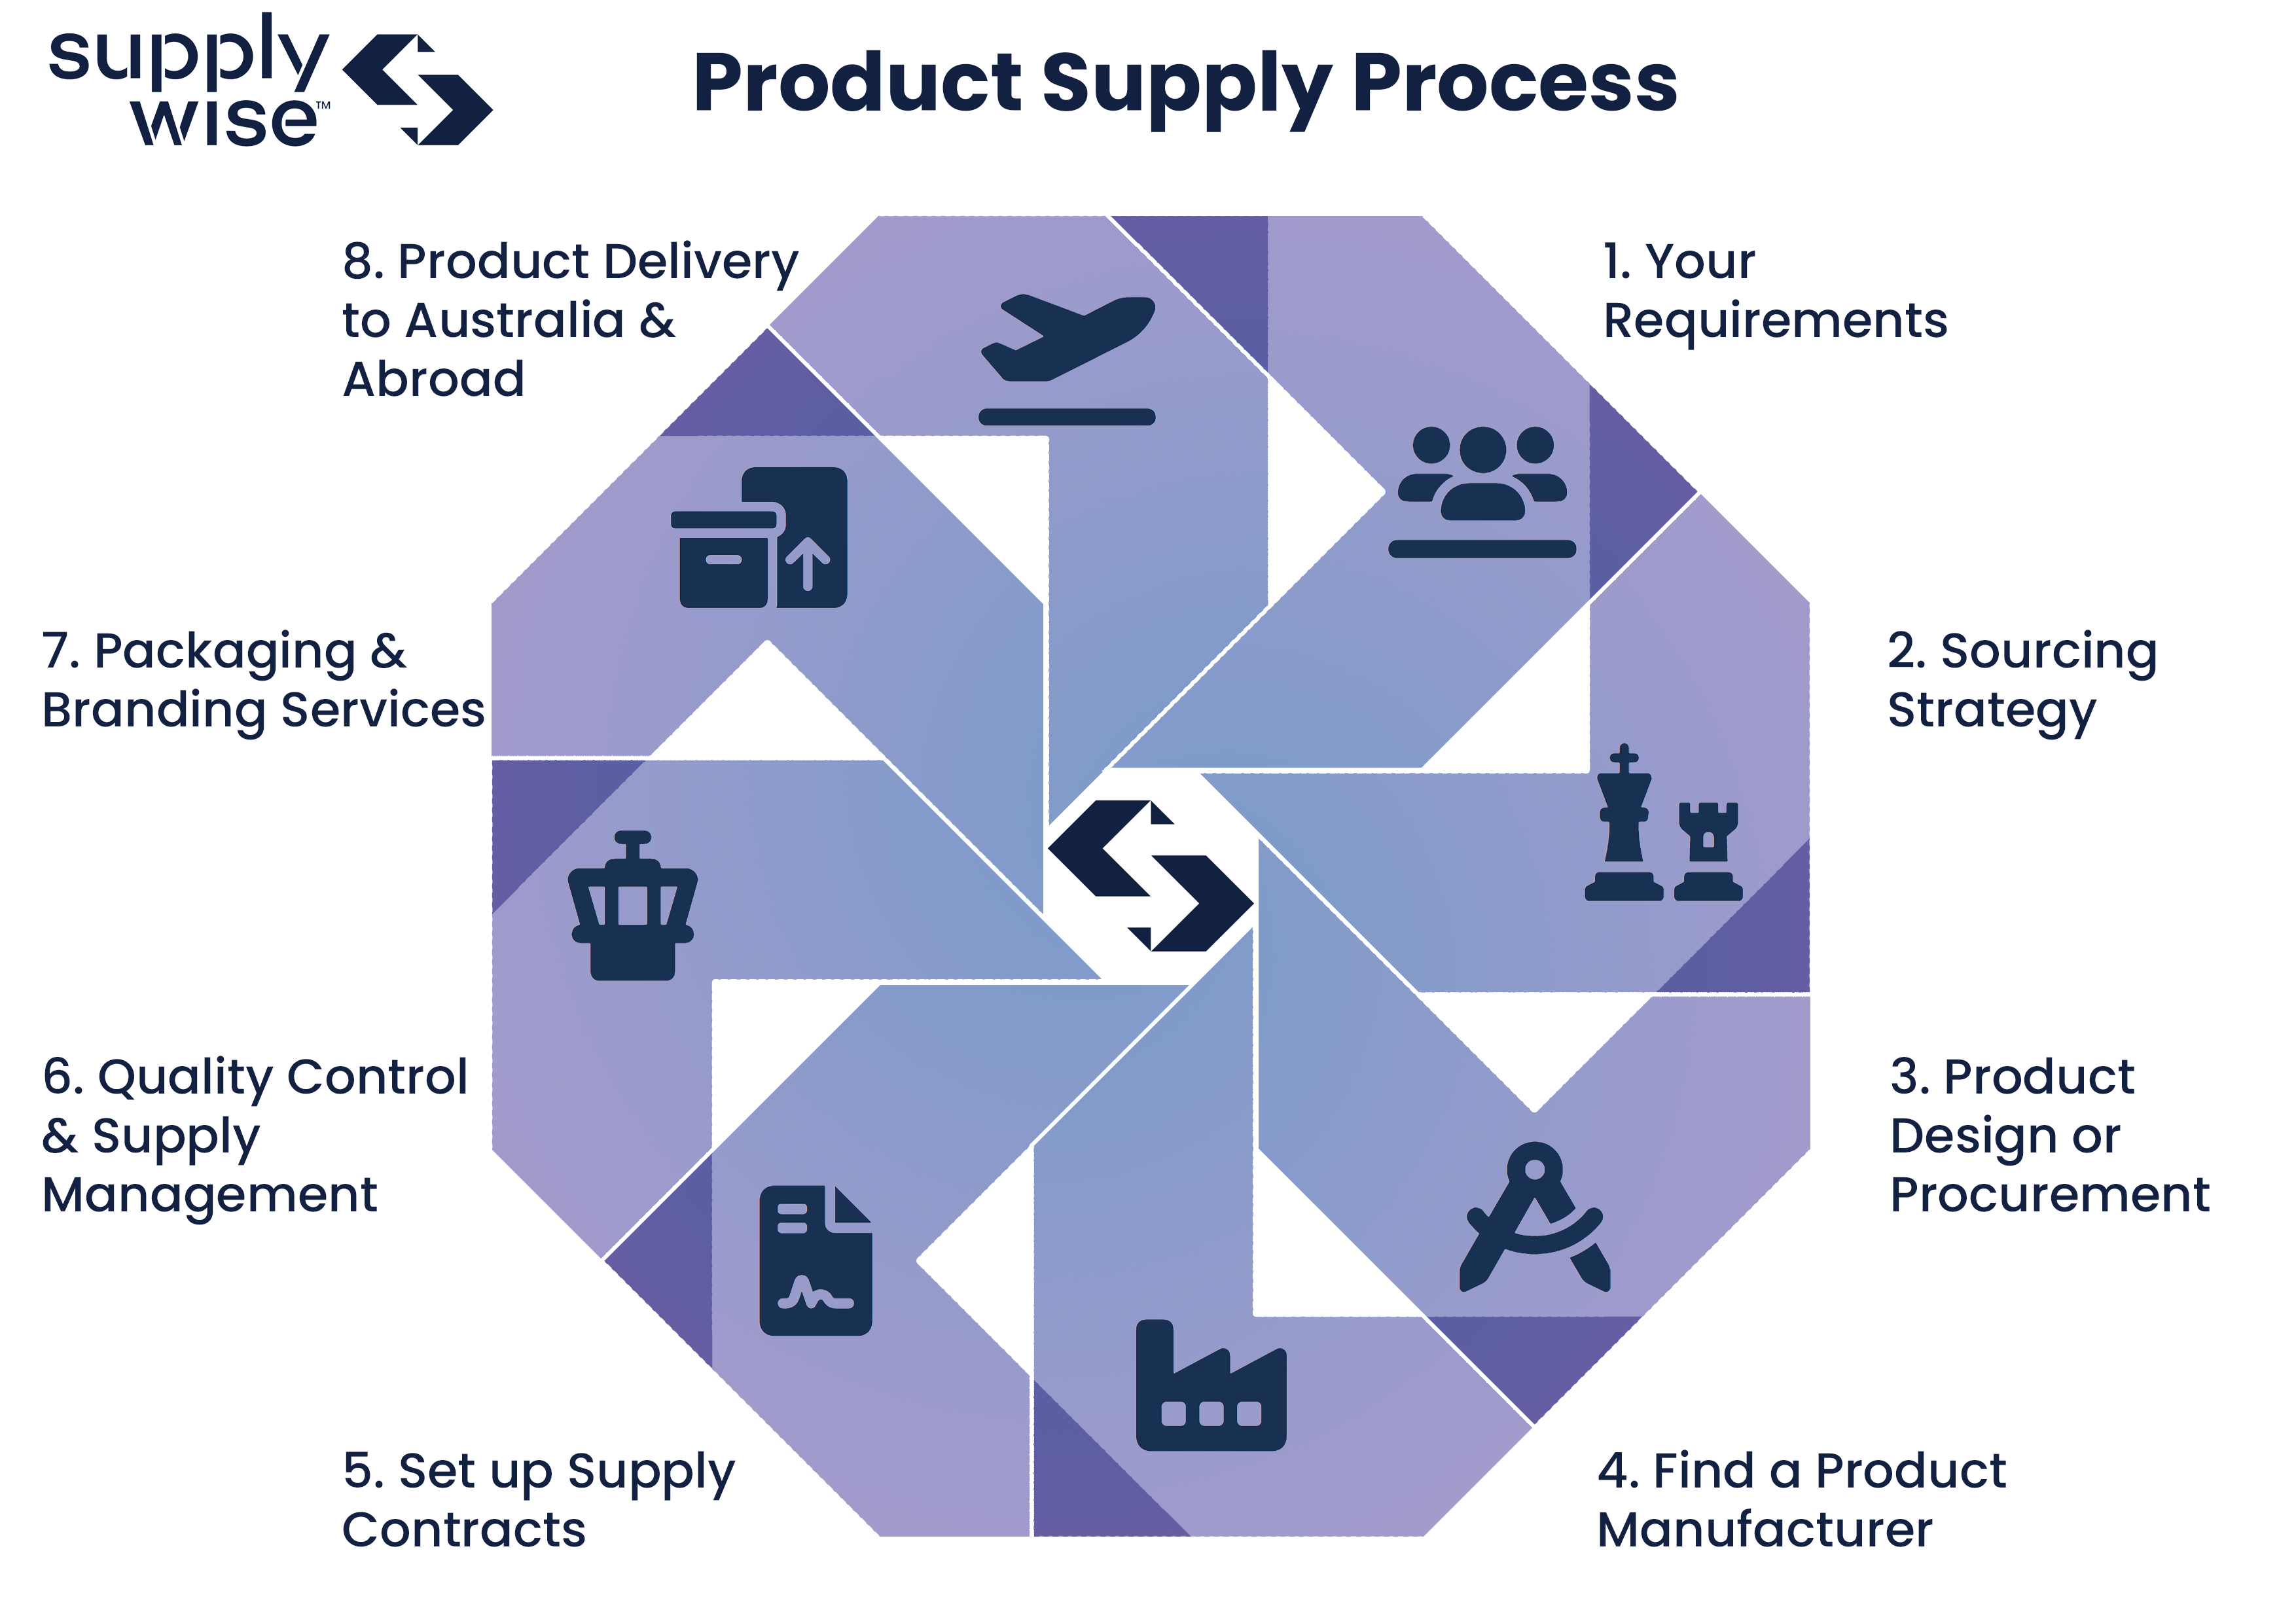 SupplyWise Strategic Sourcing and procurement process diagram